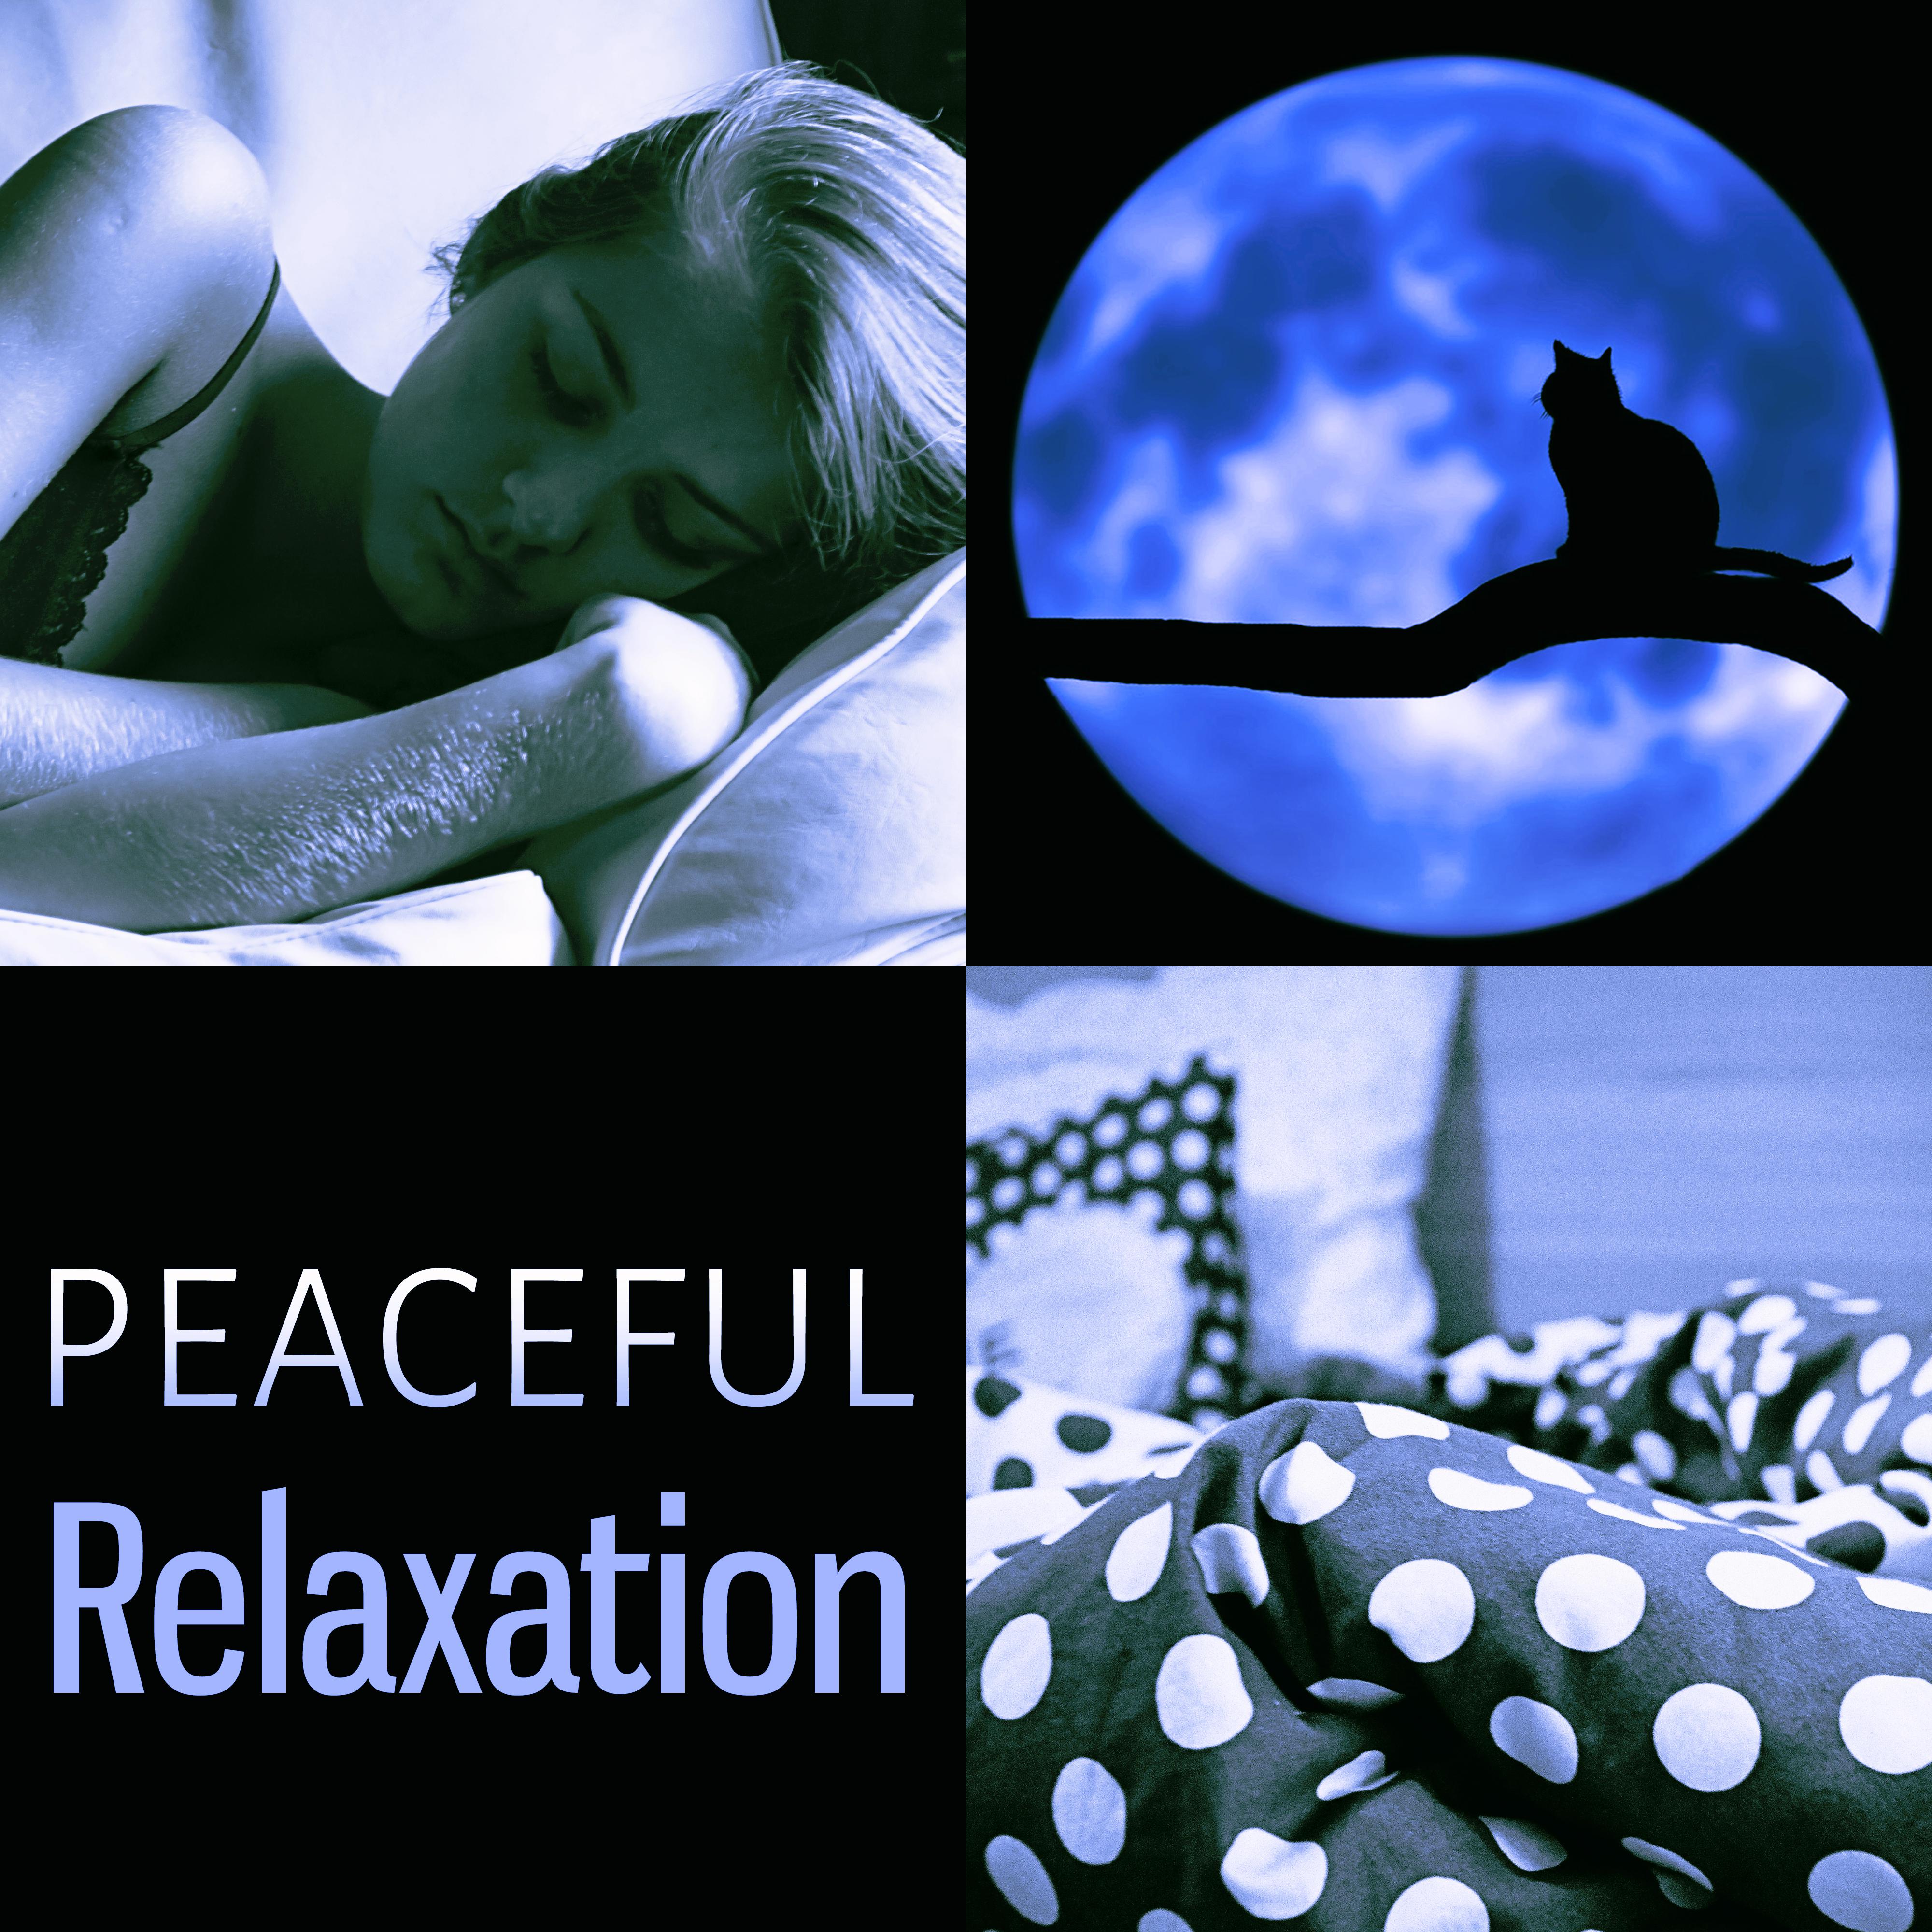 Peaceful Relaxation - Ambient Music for Restful Sleep, Natural Deep Sleep, Sounds of Nature, Ambient Sounds for Inner Peace, Stress Relief, Total Relax